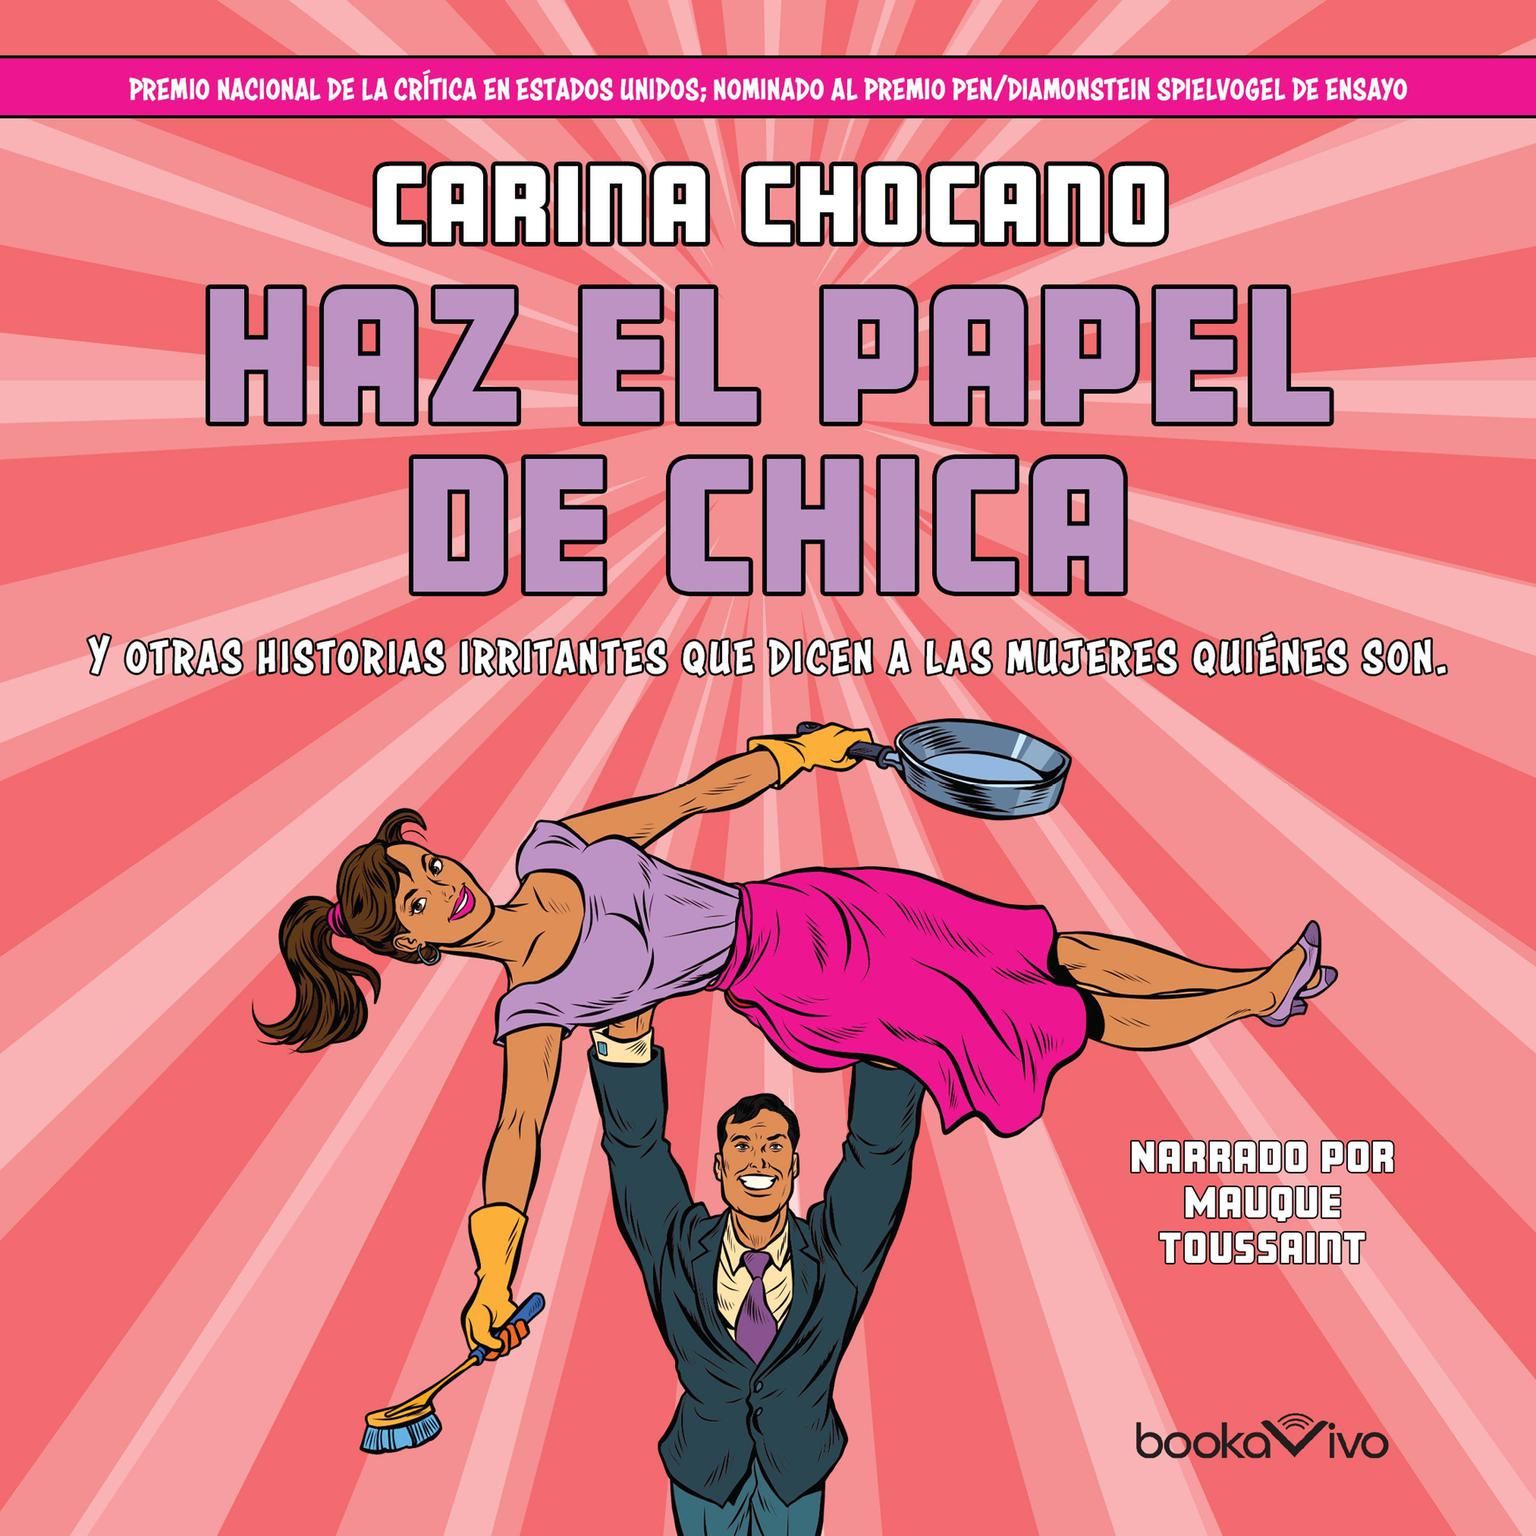 Haz el papel de chica: Y otras historias irritantes que dicen a las mujeres quie´nes son (And Other Vexing Stories That Tell Women Who They Are) Audiobook, by Carina Chocano